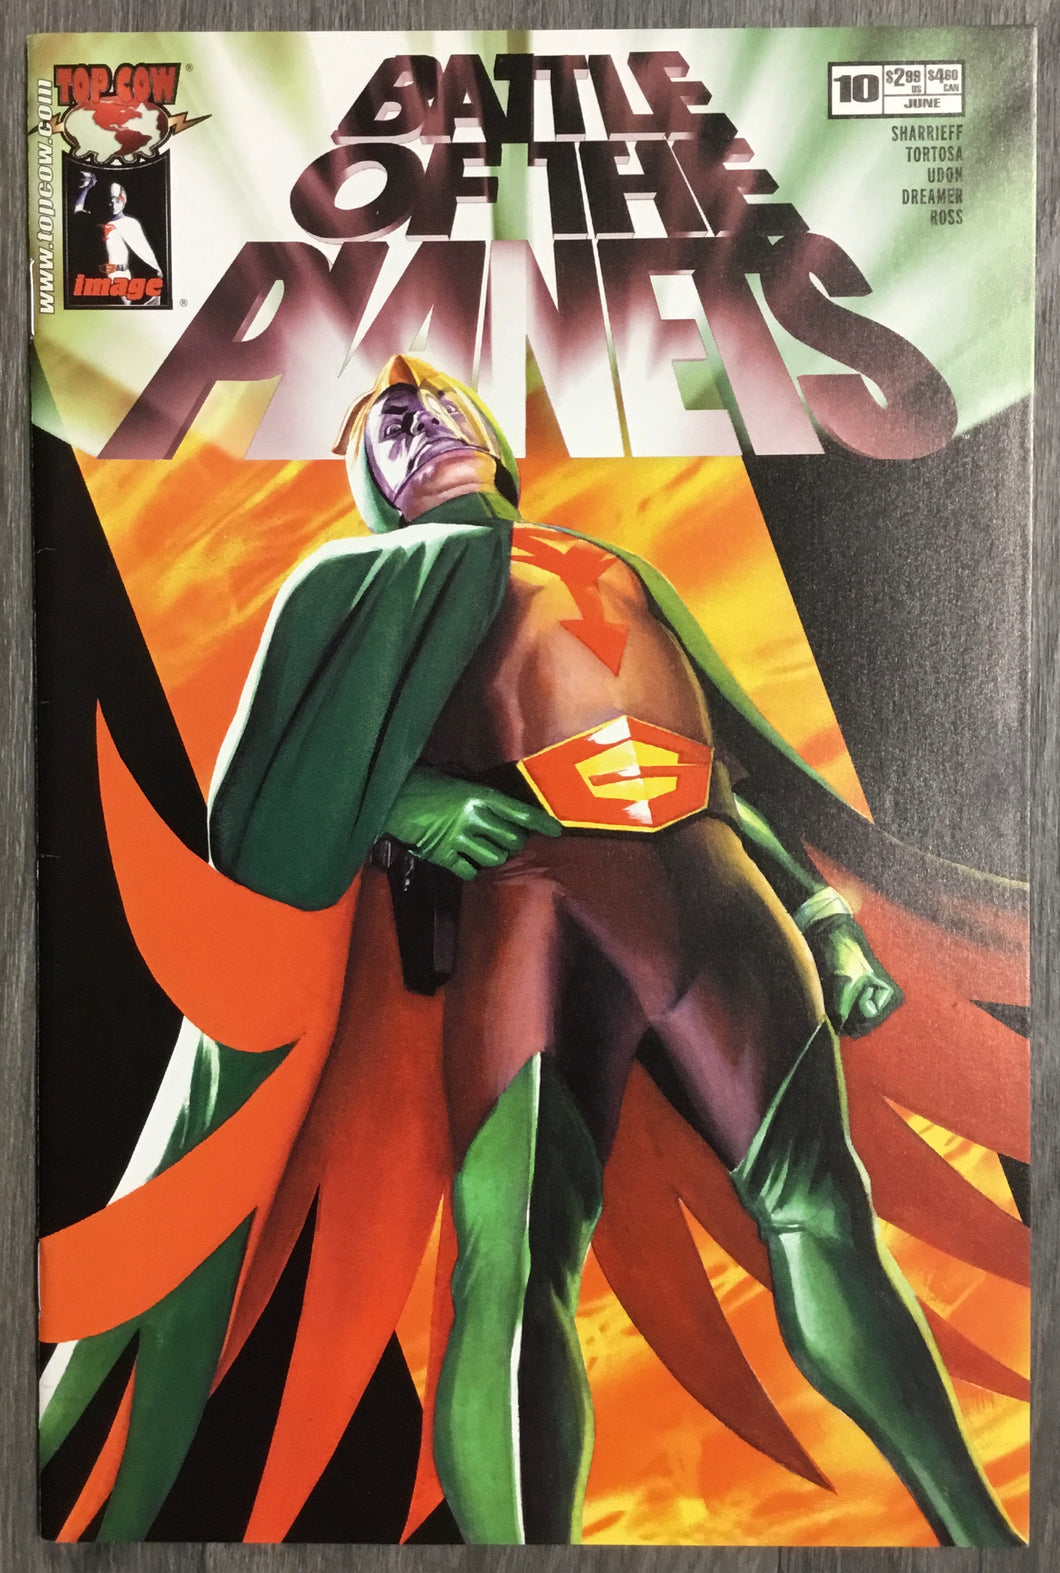 Battle of the Planets No. #10 2003 Top Cow/Image Comics